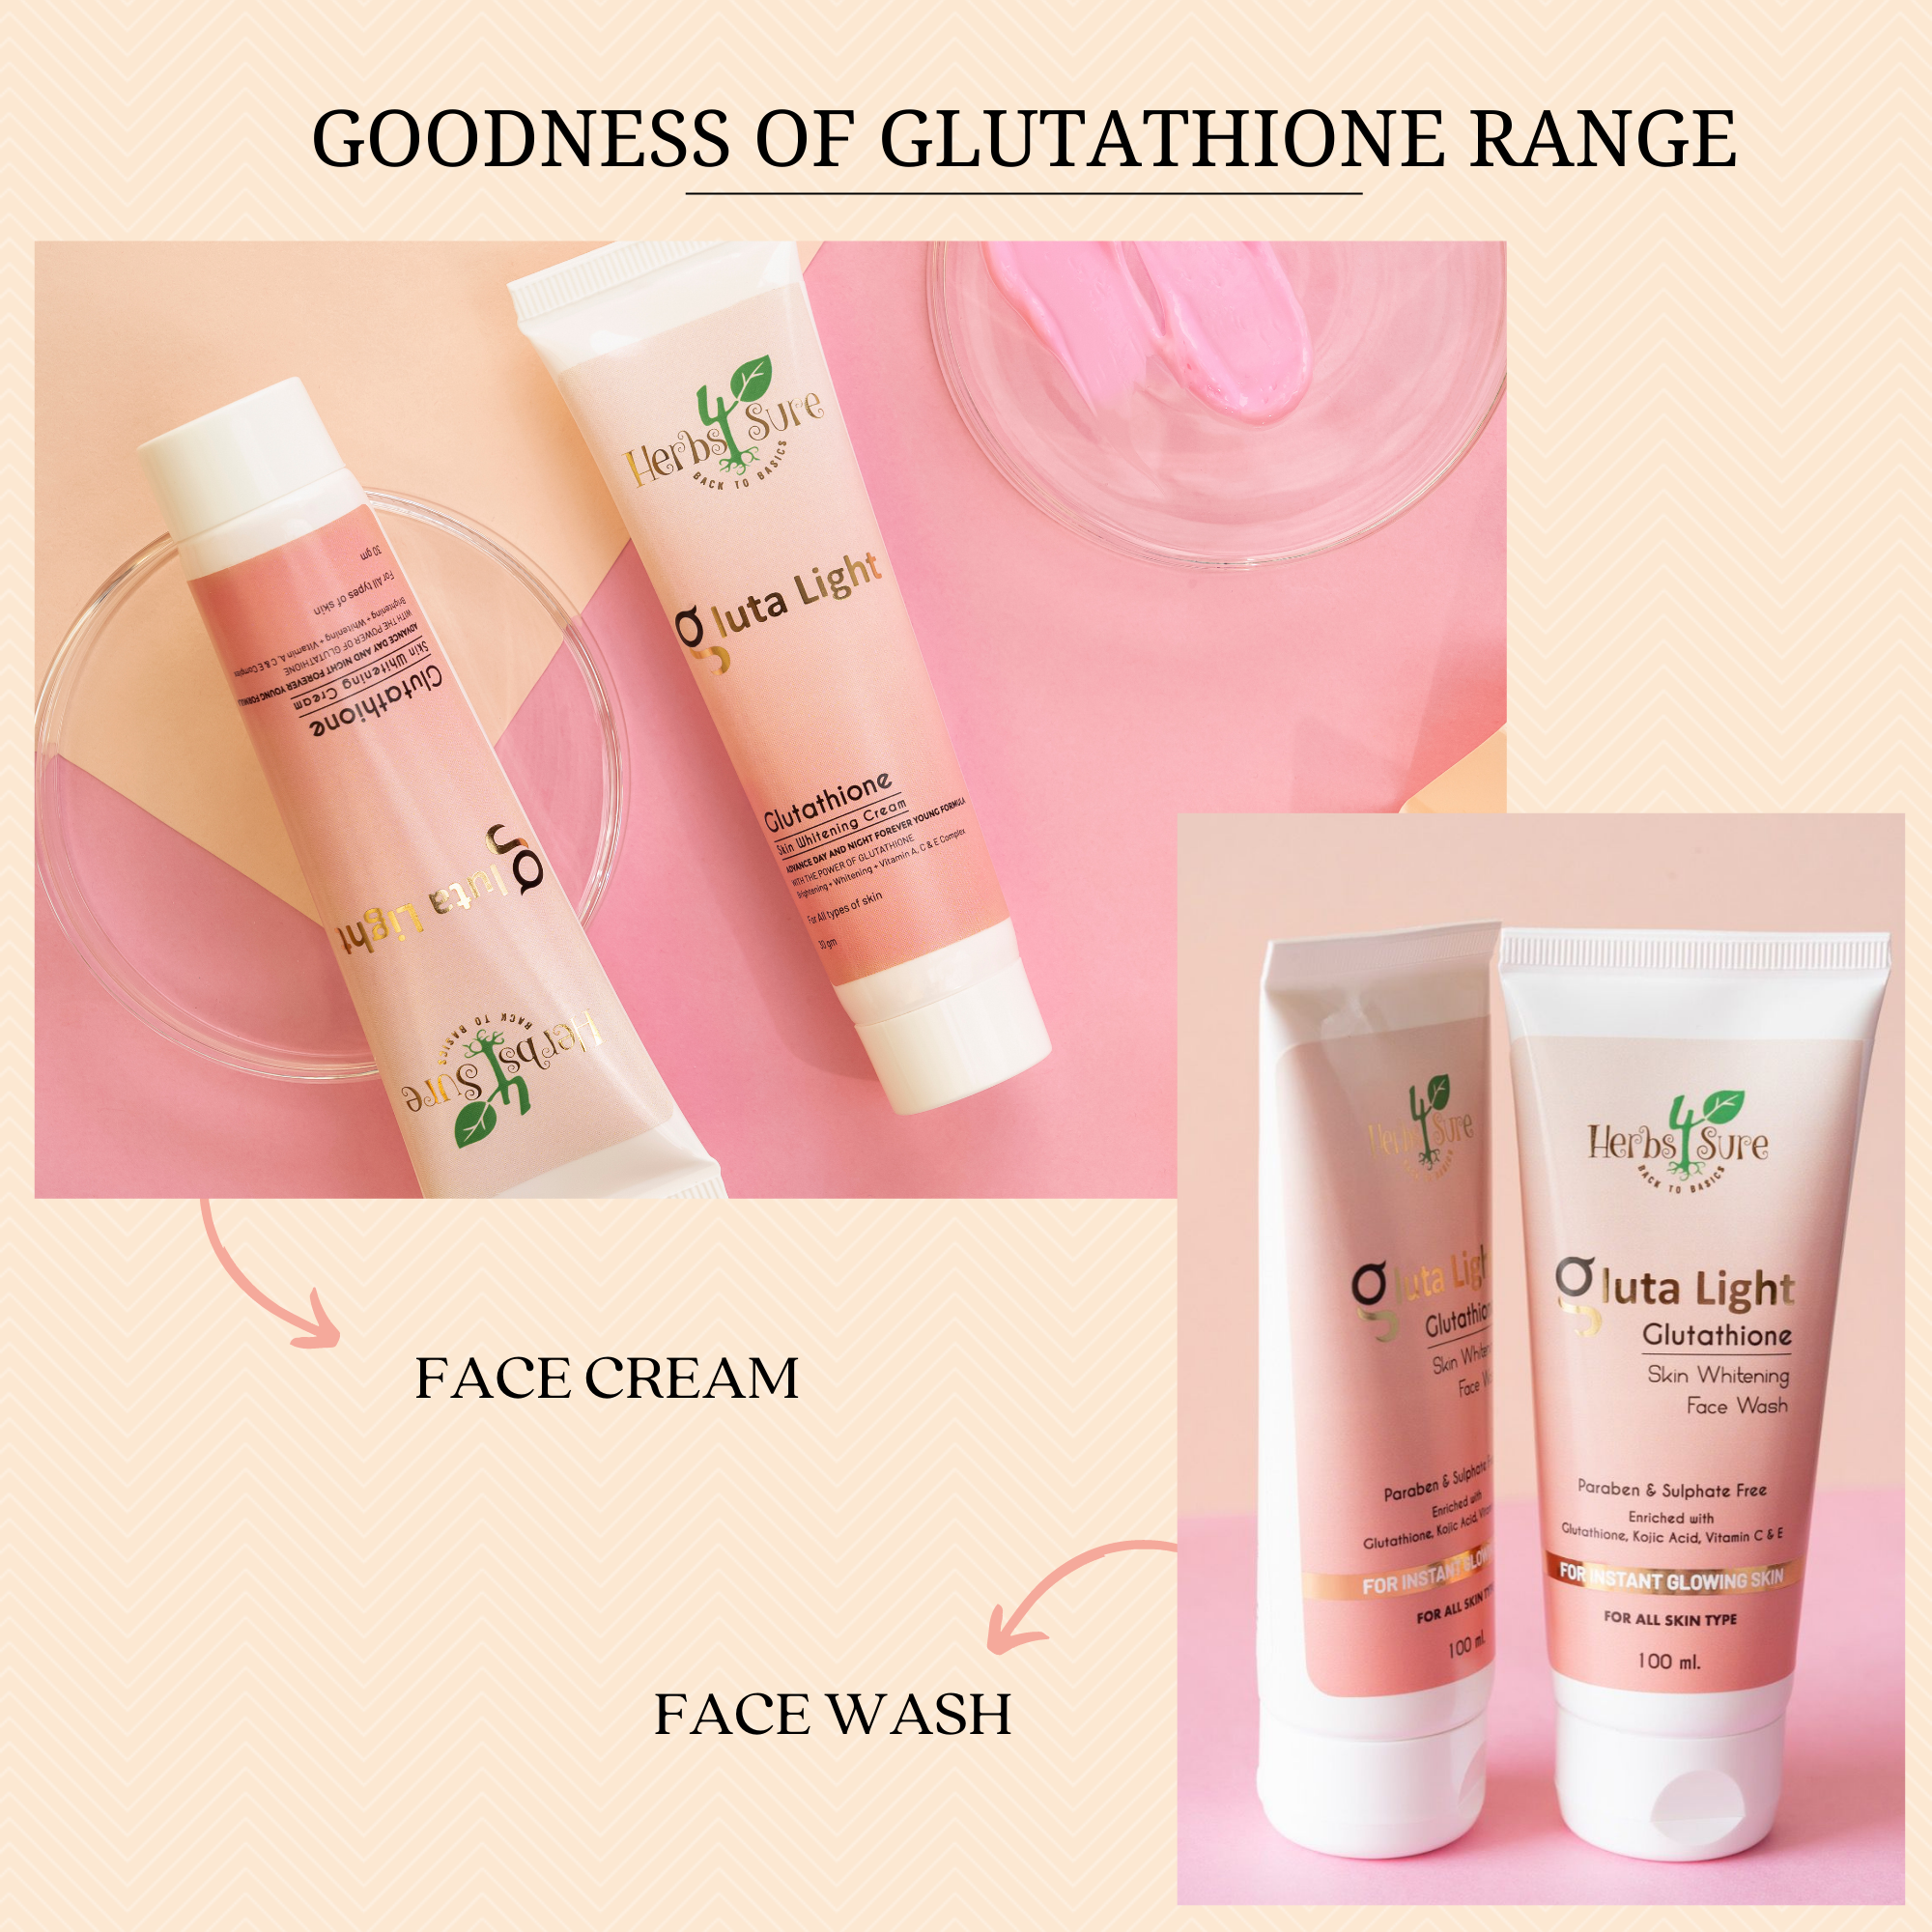 Glutathione Skin Lightening and Brightening Cream| Advanced Anti-Aging Cream for Face -Pigmentation & Tan Removal| For all skin types Lightweight and Effective Skincare Solution